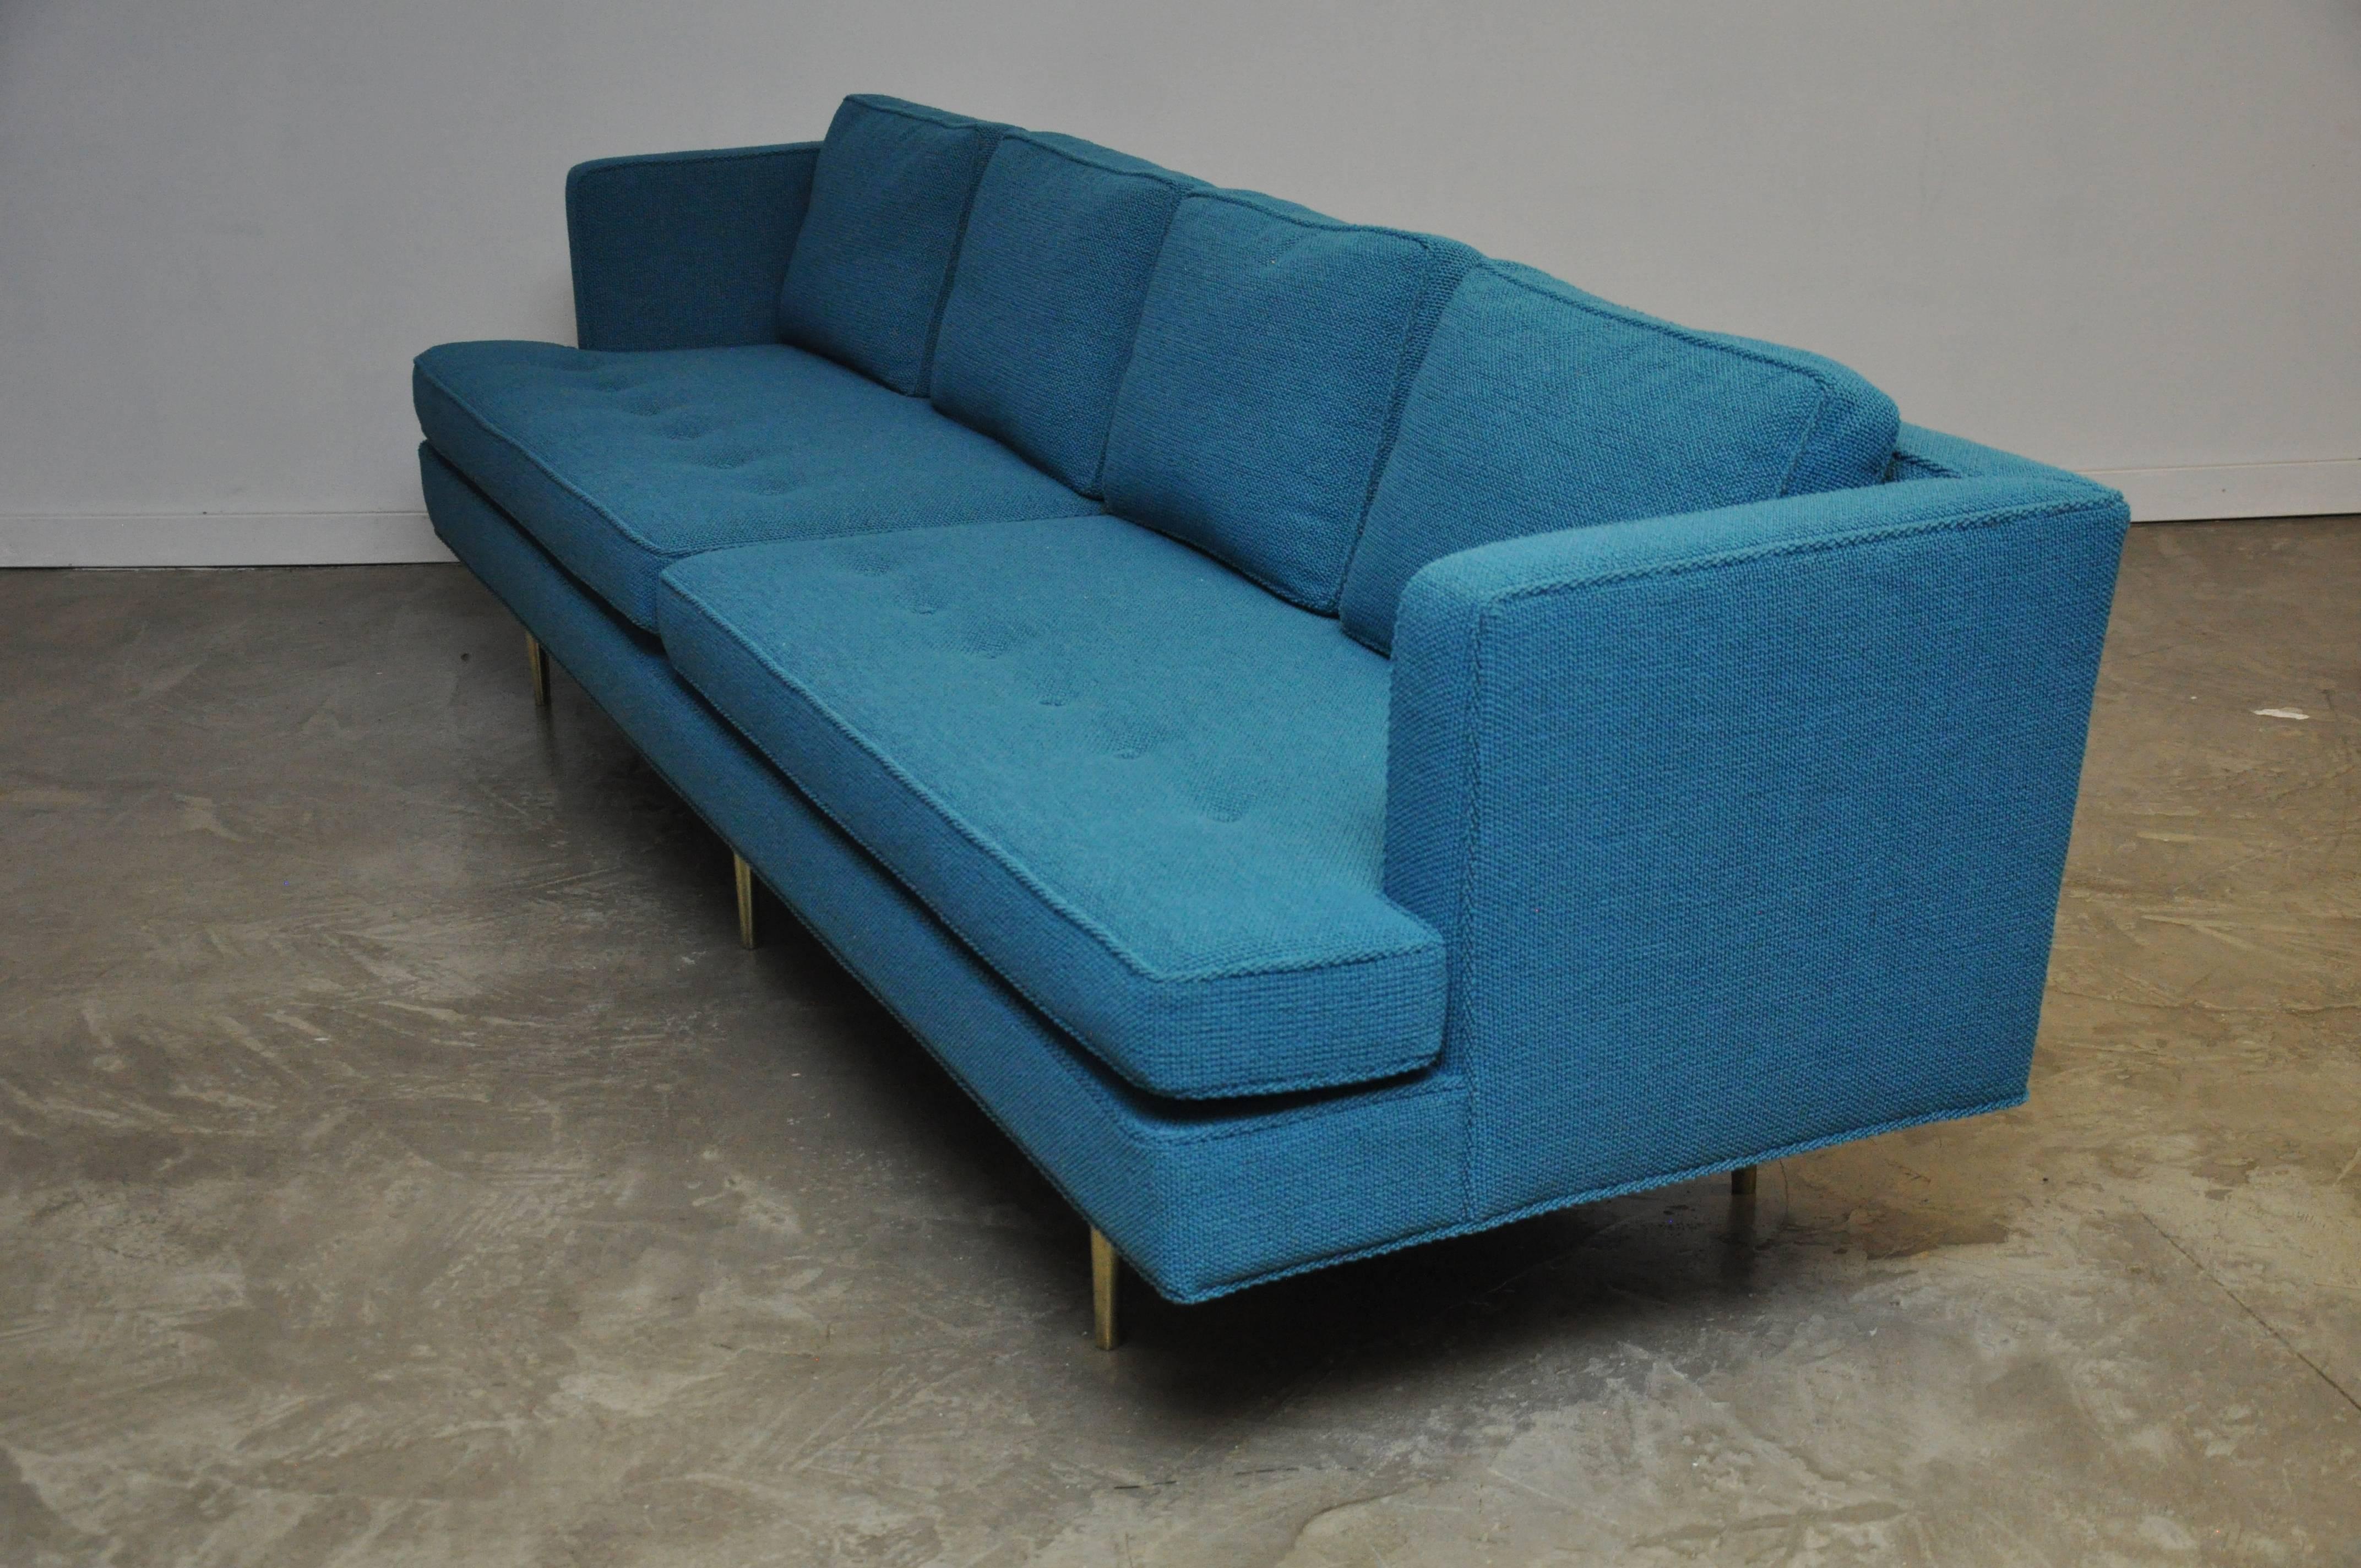 Monumental sofa designed by Edward Wormley for Dunbar. Fully restored. Polished and lacquered brass legs with new Knoll Aegean/Turquoise bouclé fabric. New foam seat cushions with down filled back cushions.